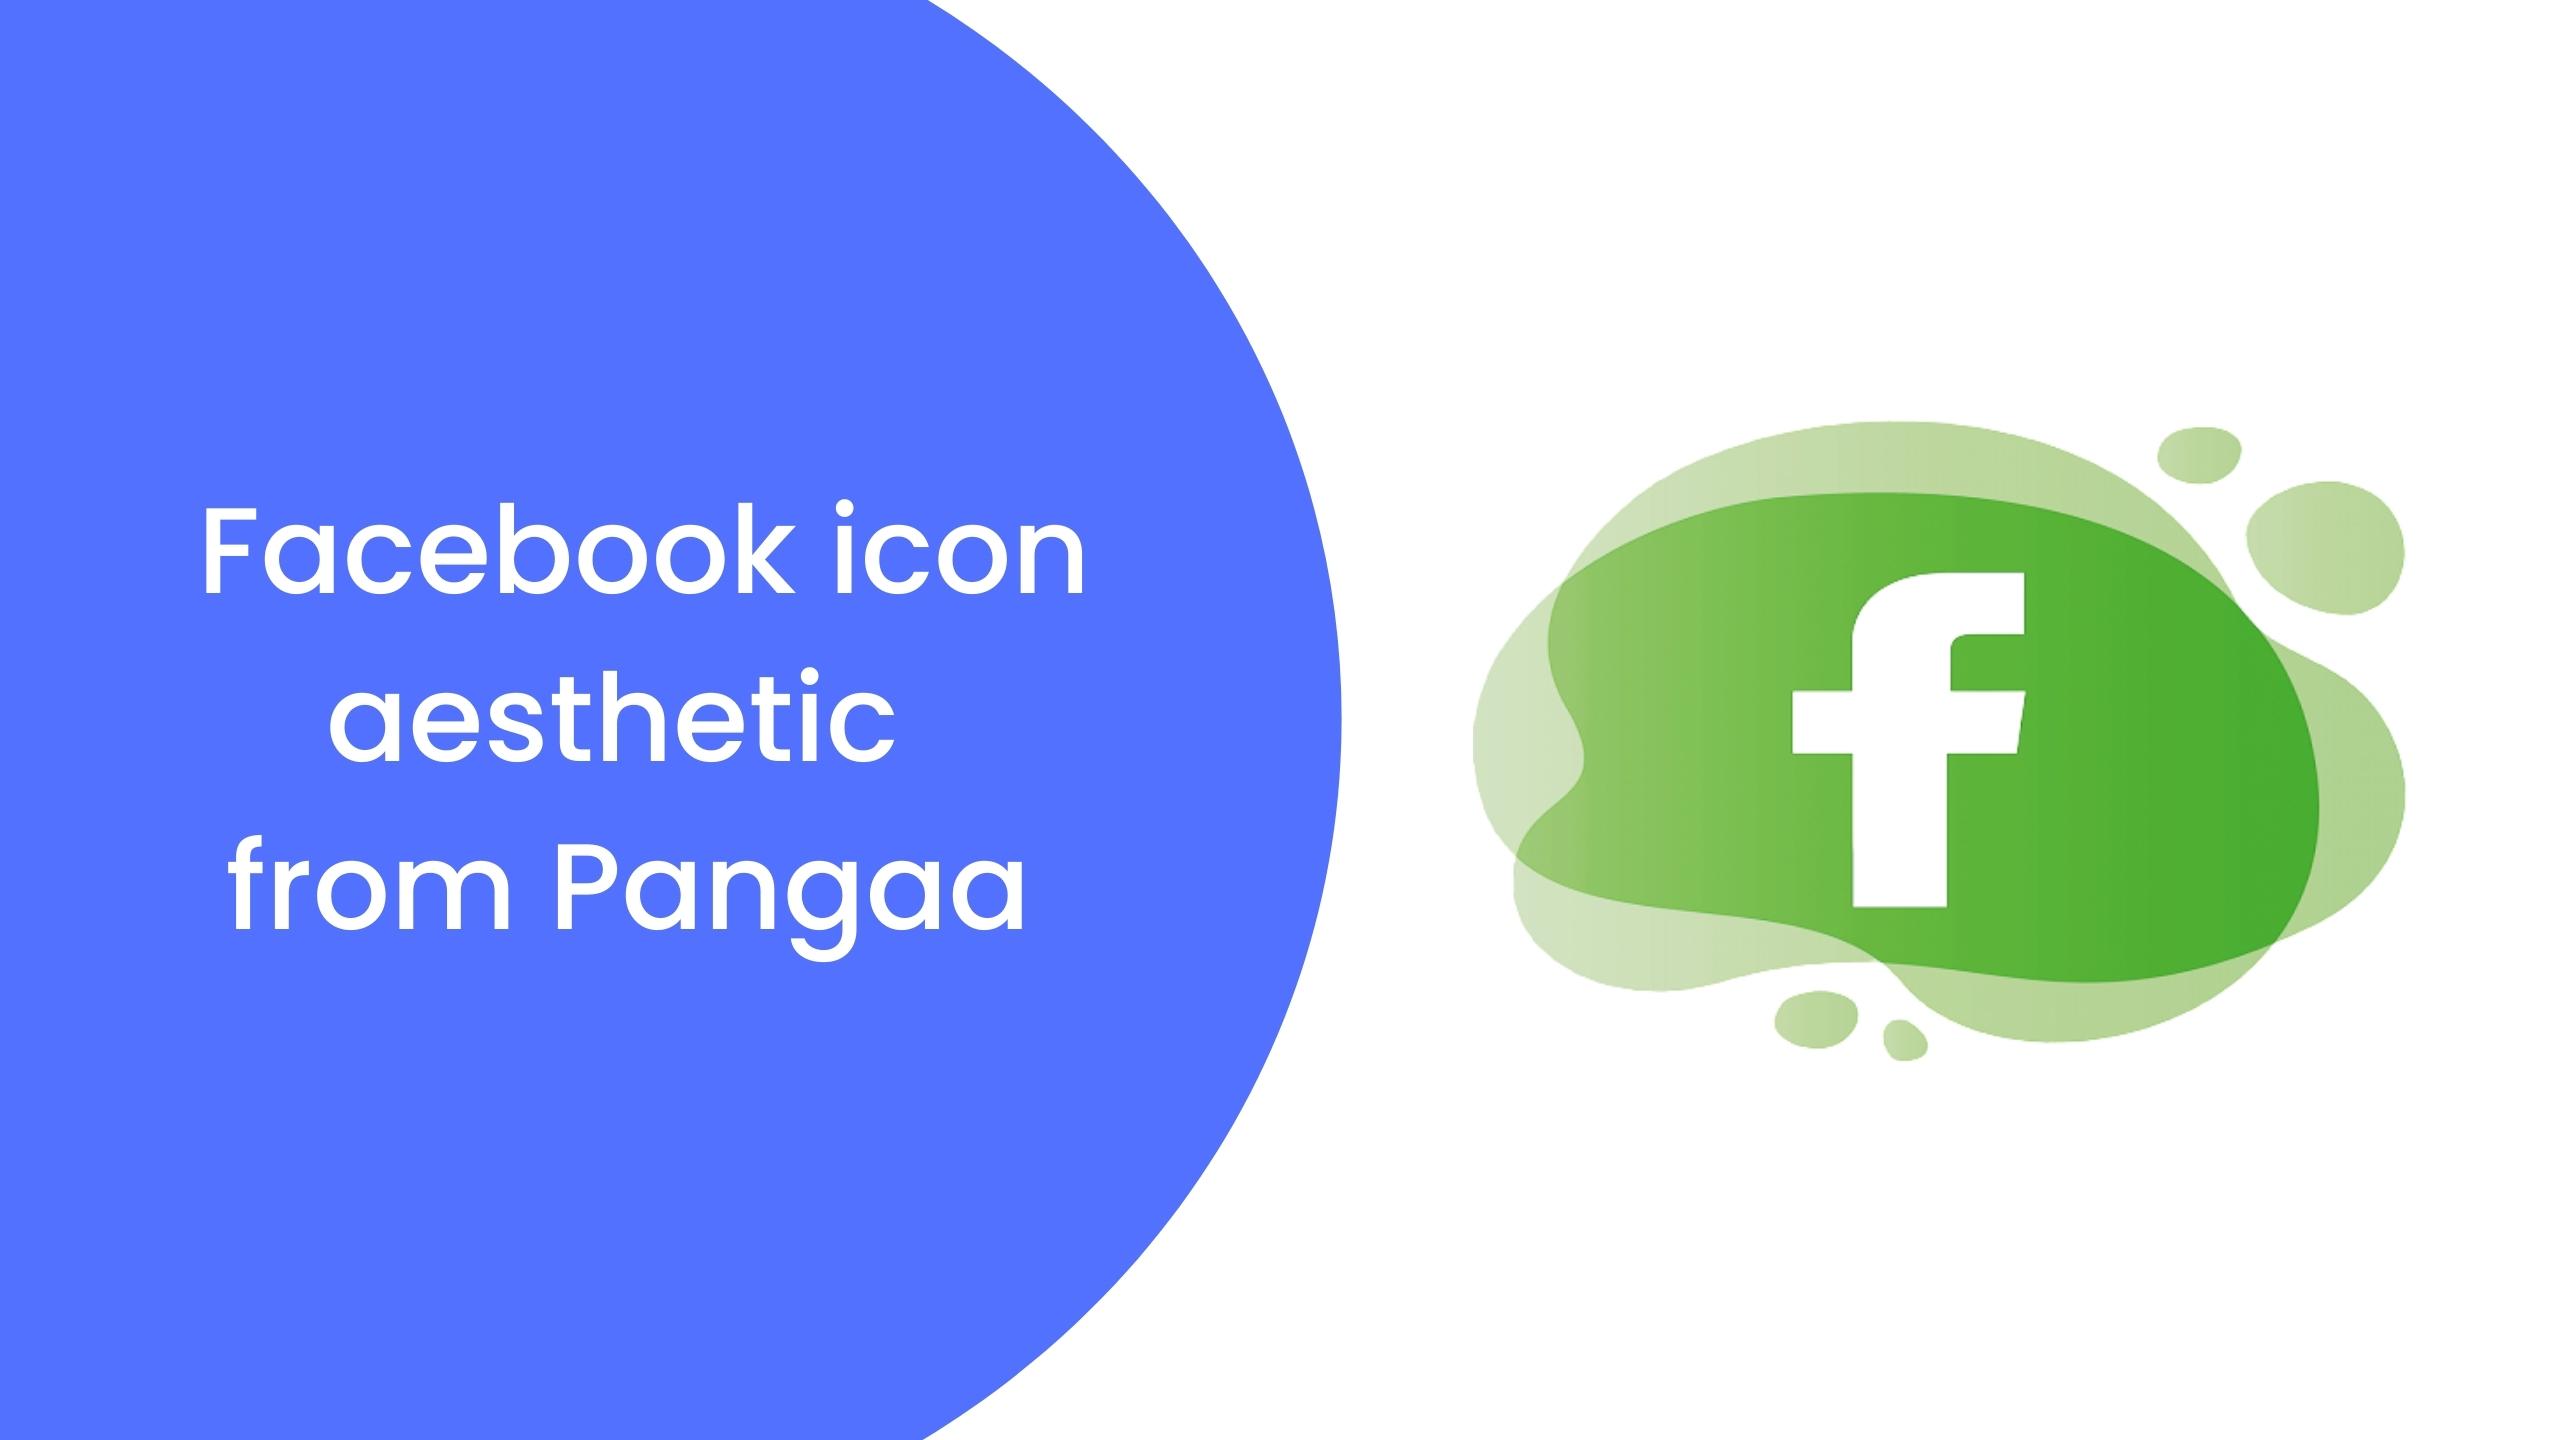 Facebook icon aesthetic from Pangaa